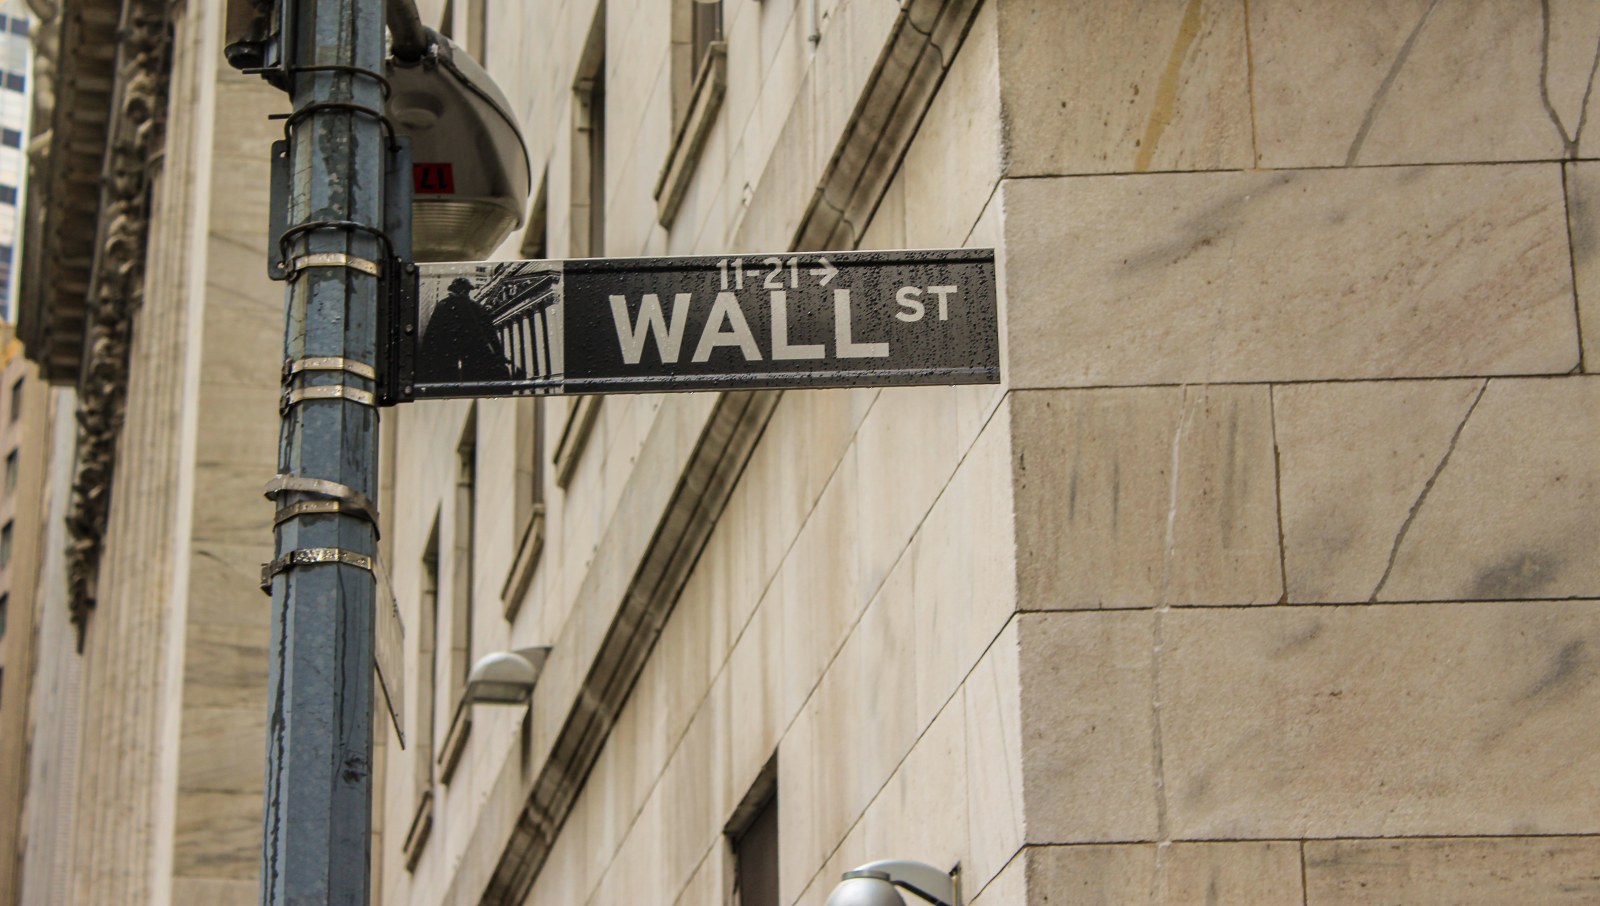 Wall Street Sign - Macroeconomics at work in the financial markets